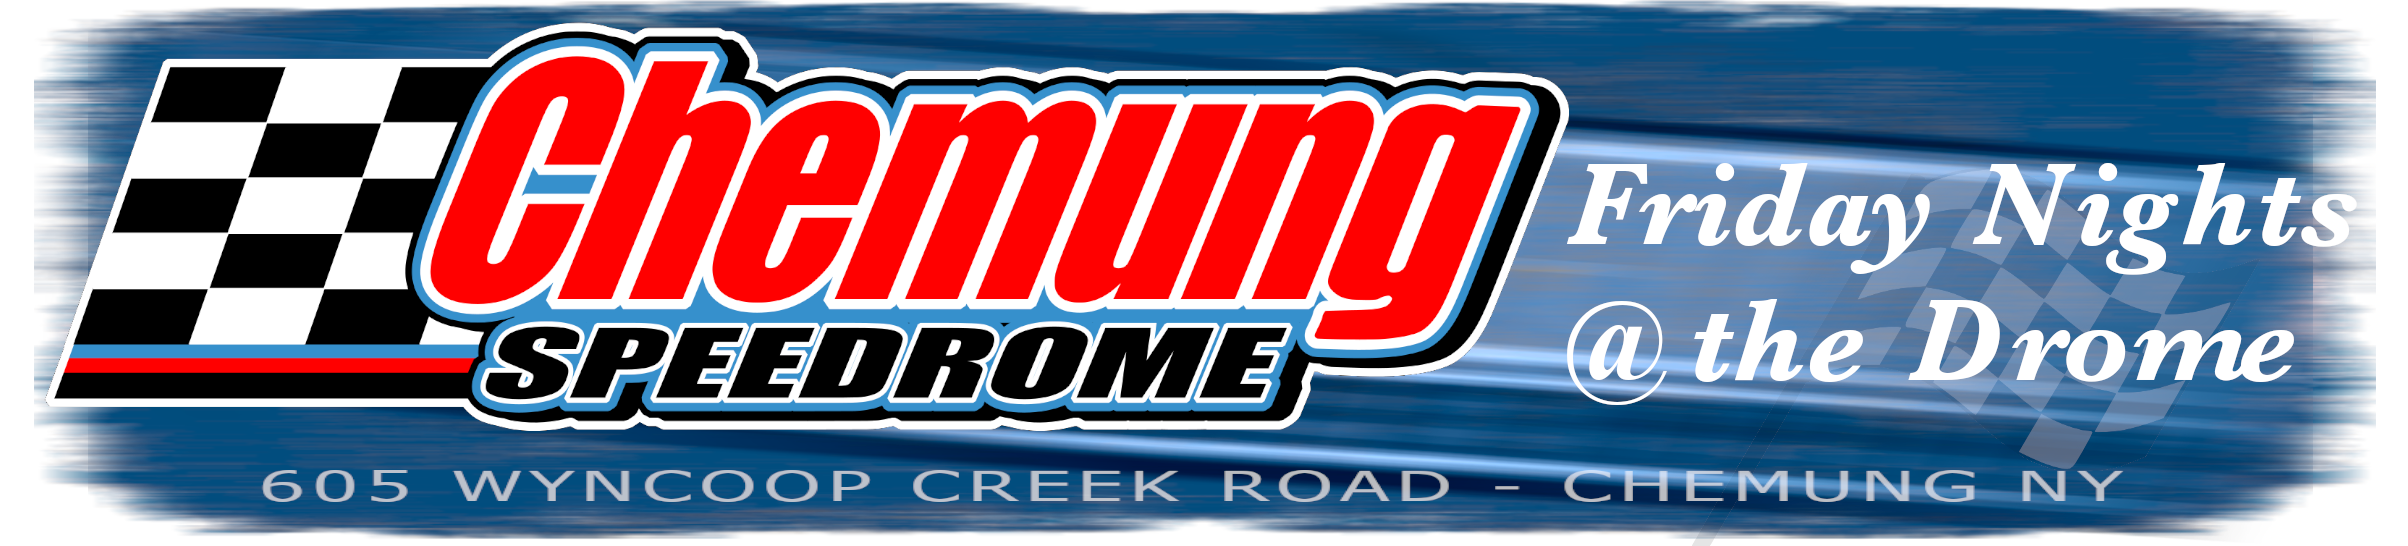 Chemung Speedrome - Friday Nights at the Drome